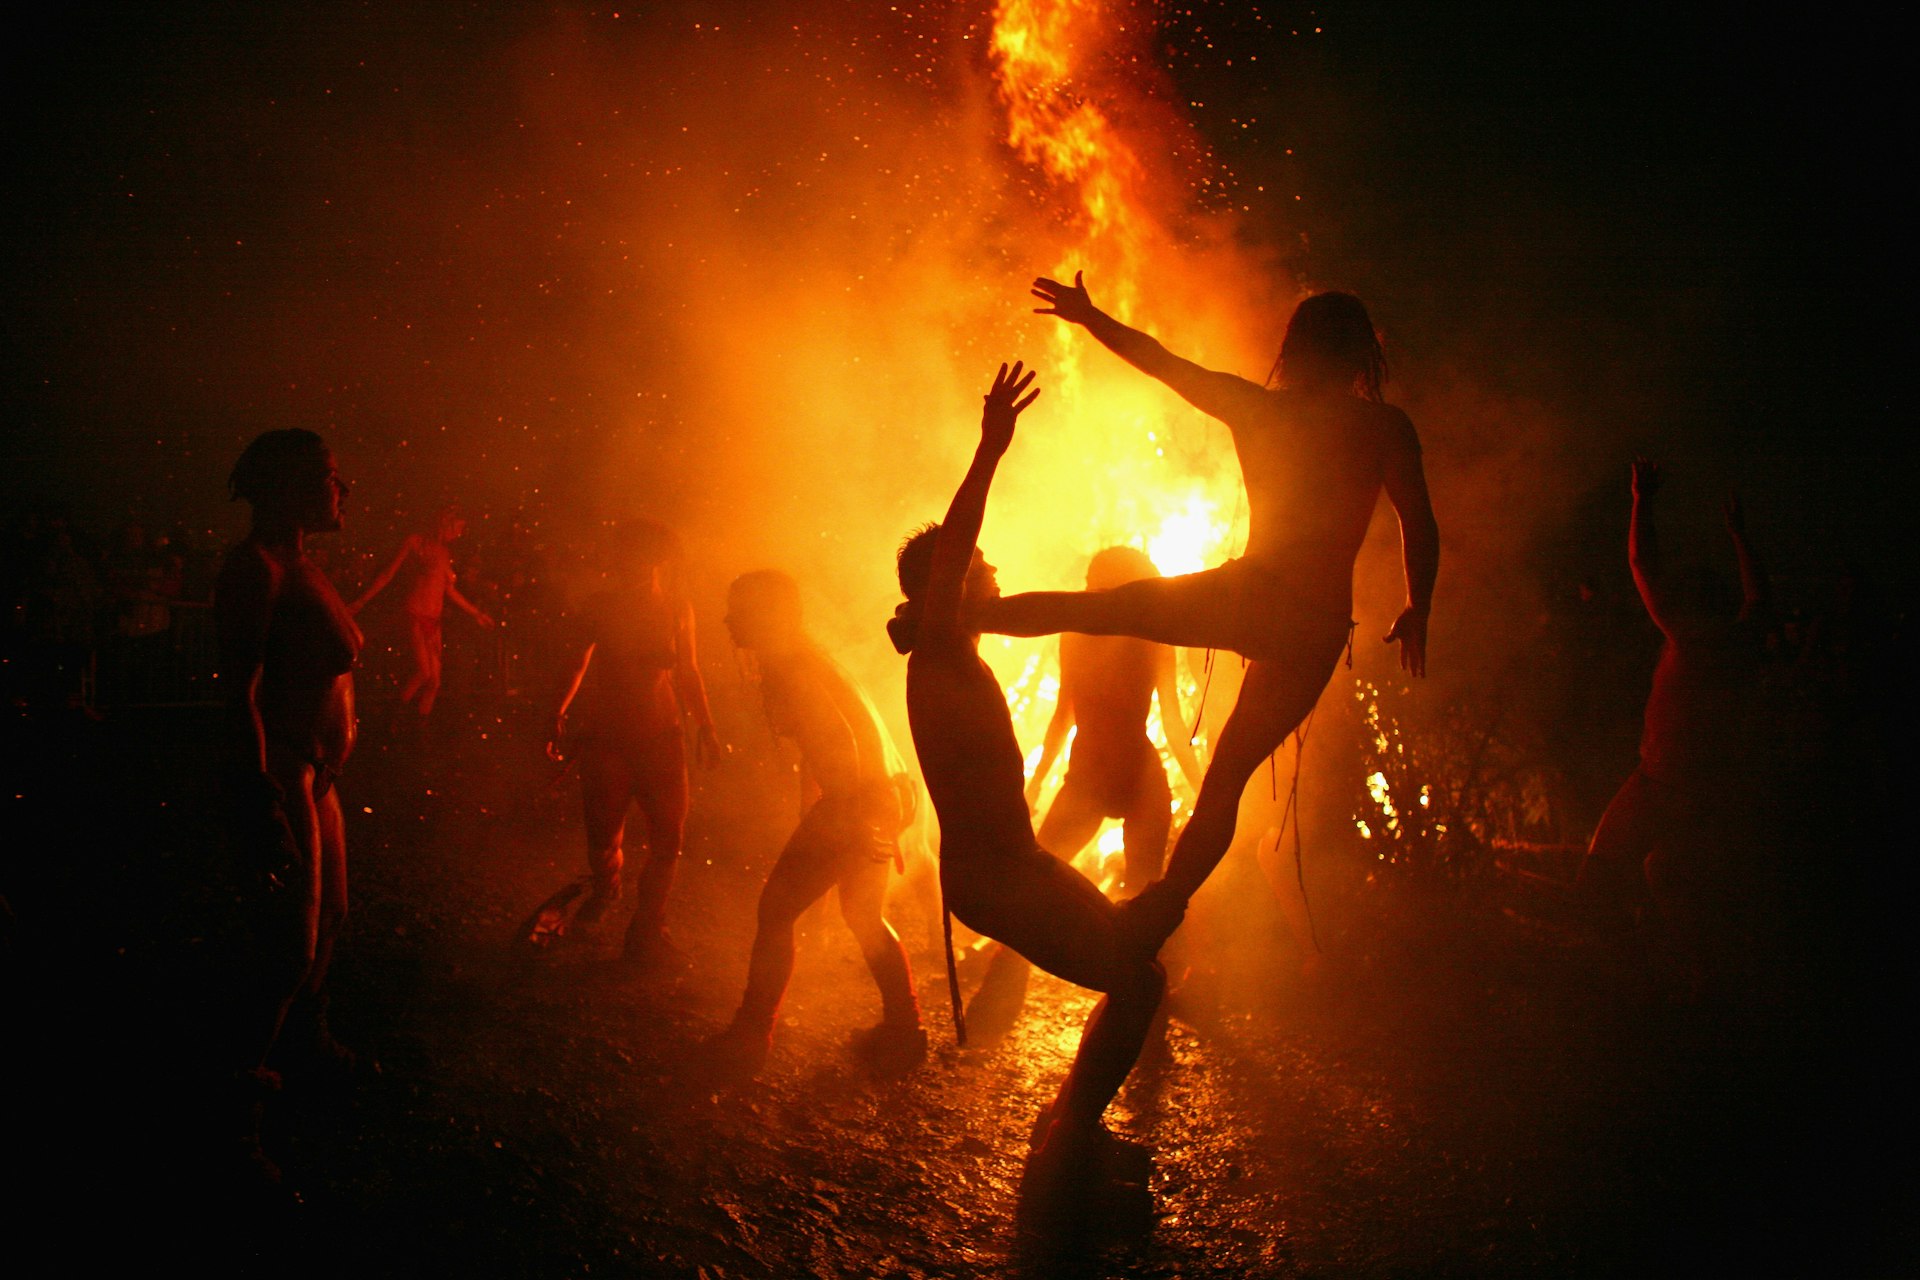 Acrobats dressed in loin cloths and body paint are in silhouette against a large bonfire. One balances their right foot on a partner's bent knees and the other leg on his shoulder, holding their arms out towards the fire as other performers dance in the background 